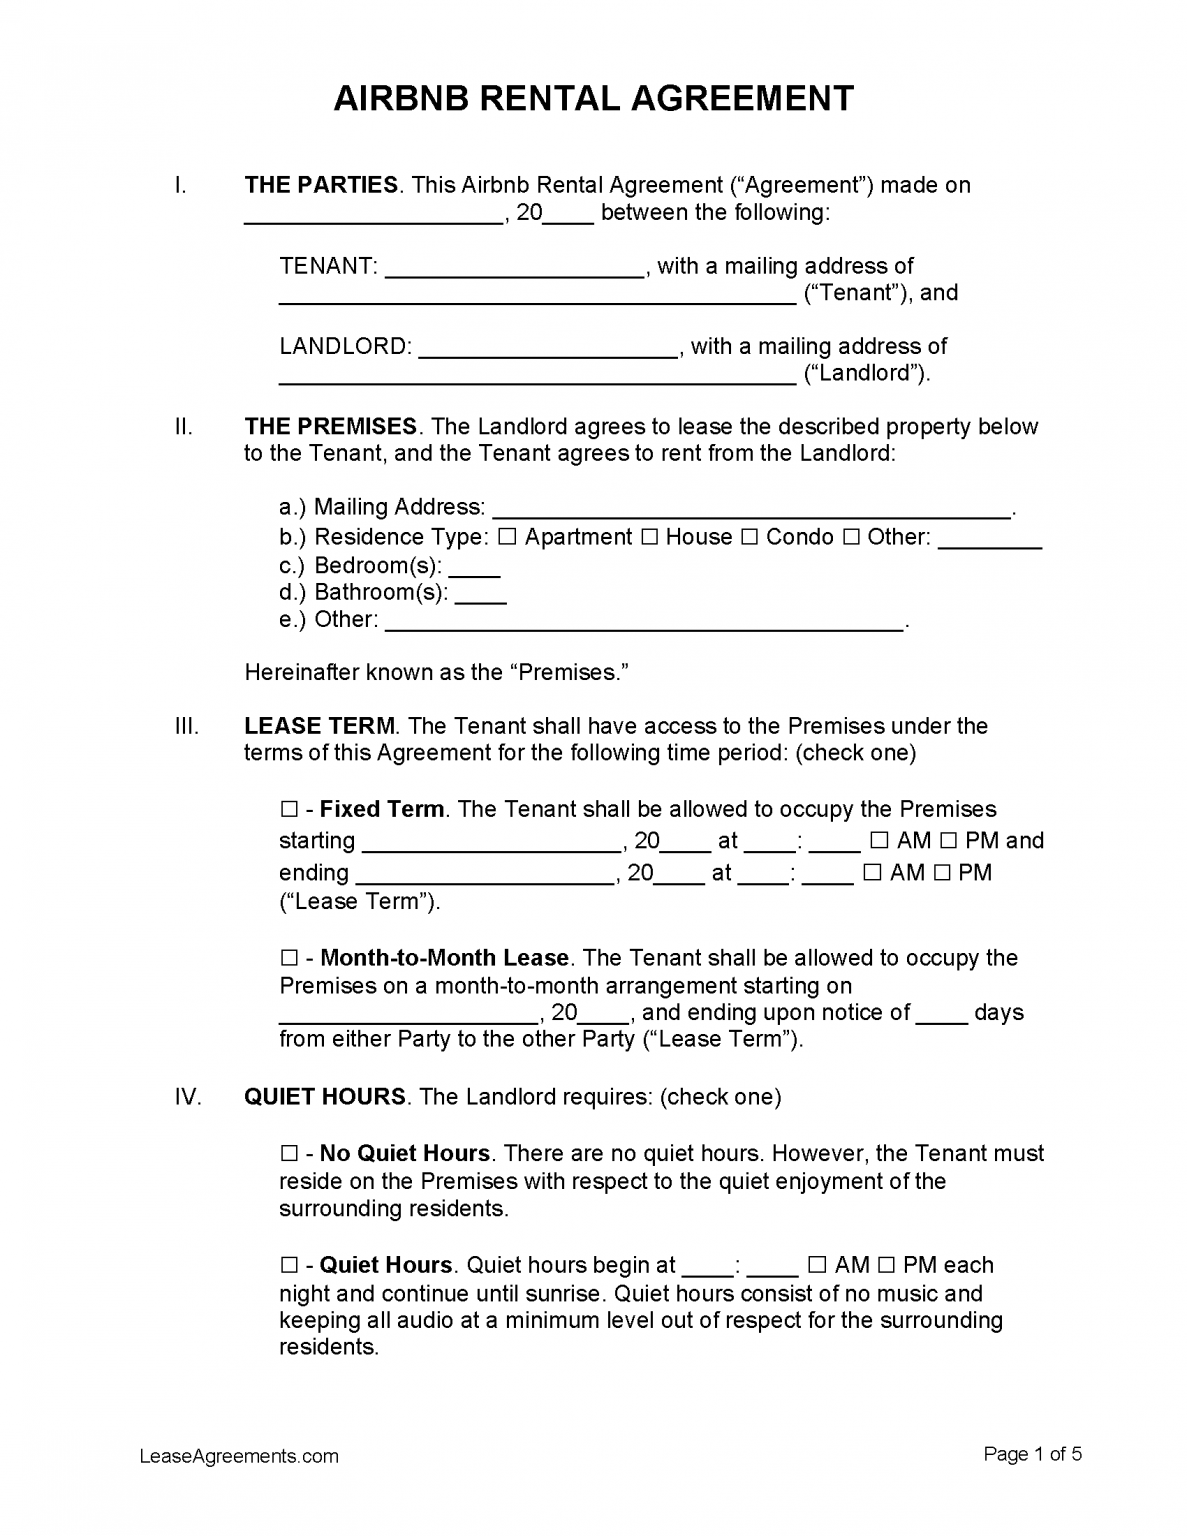 Airbnb Rental Lease Agreement Template